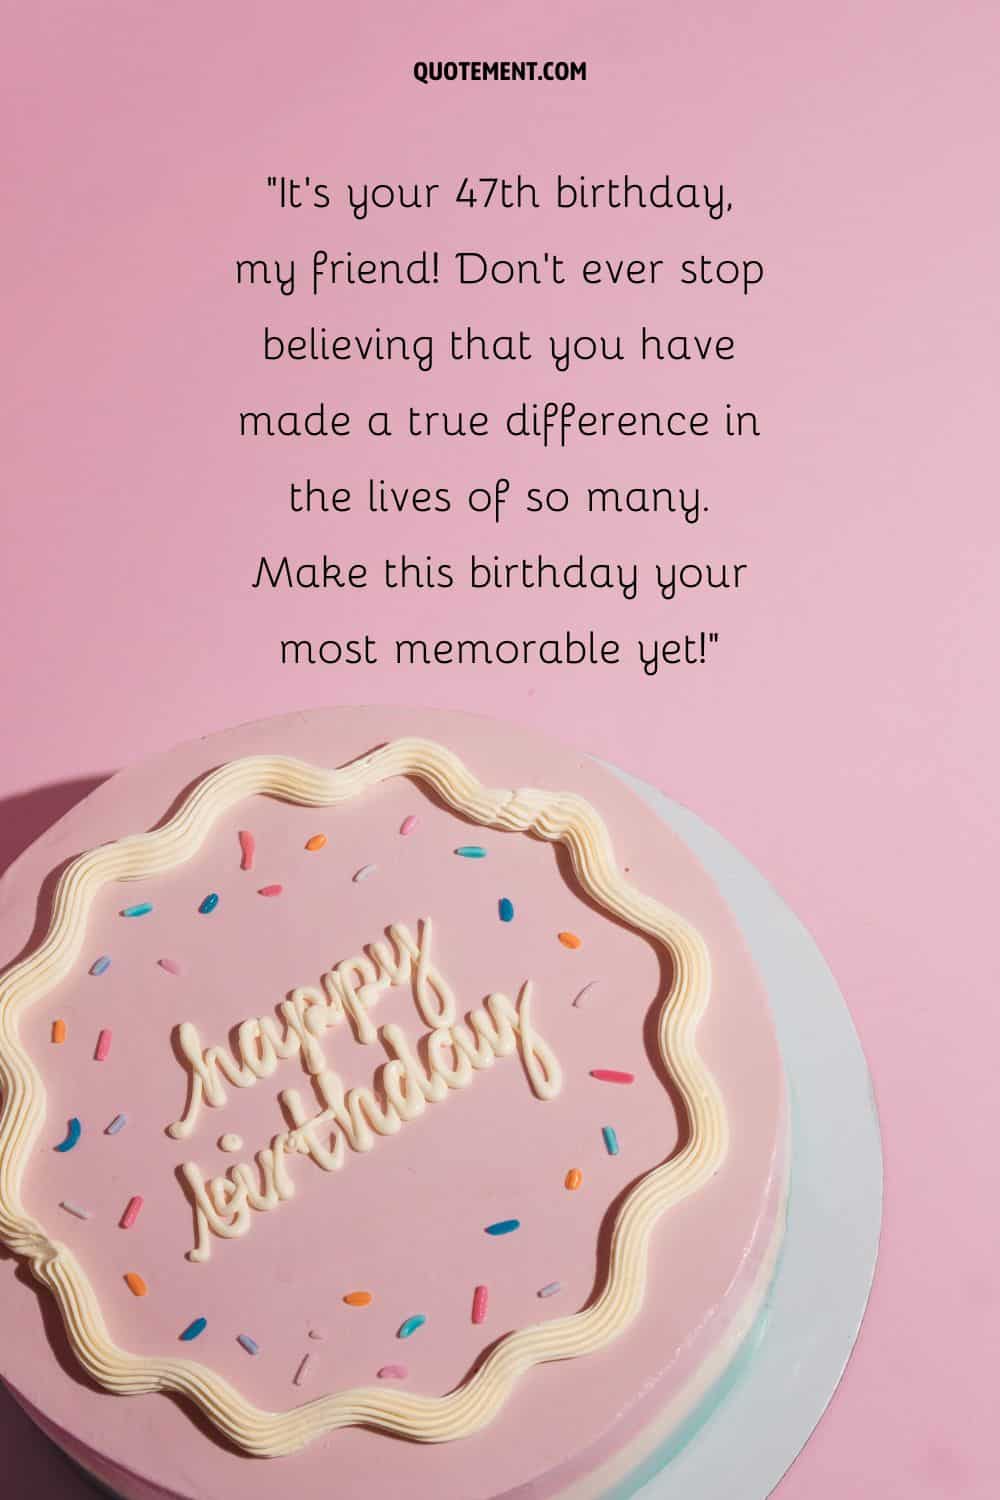 Heartfelt message for a friend who turns 47 and a birthday cake below
